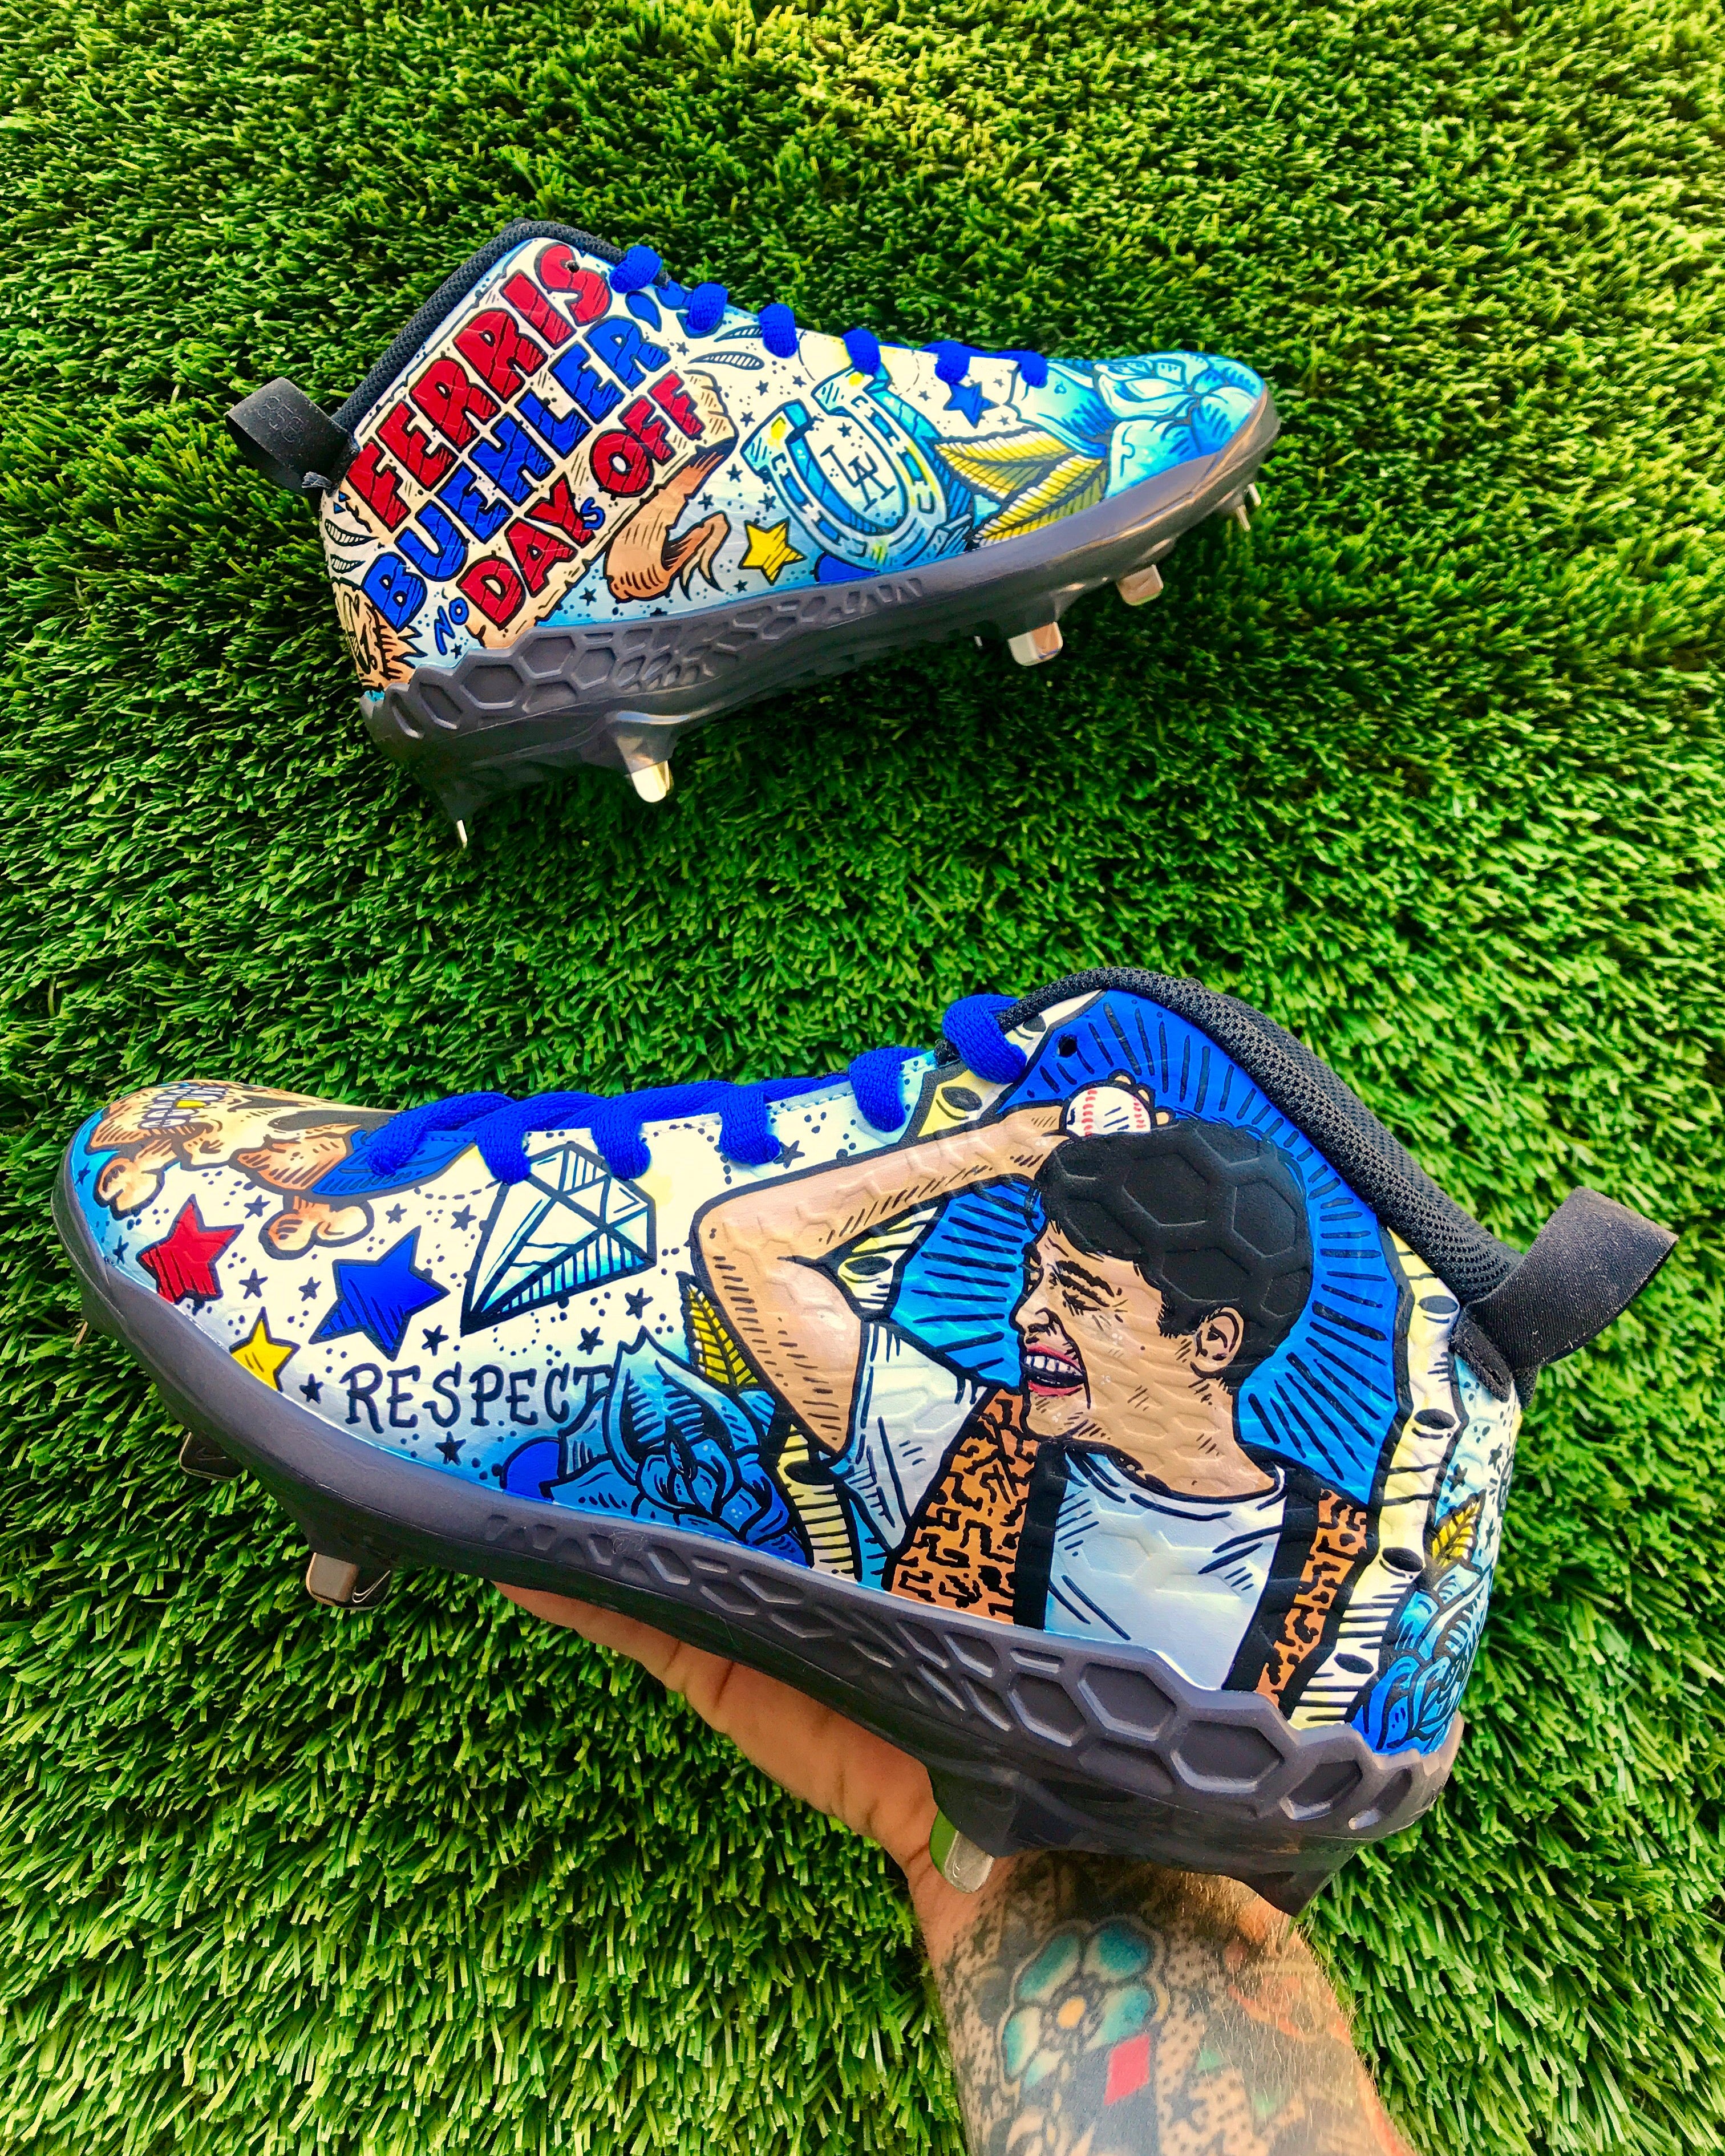 Walker Buehler's Custom Dodger Inspired AJ1 Cleat - with Cuts Clothing 